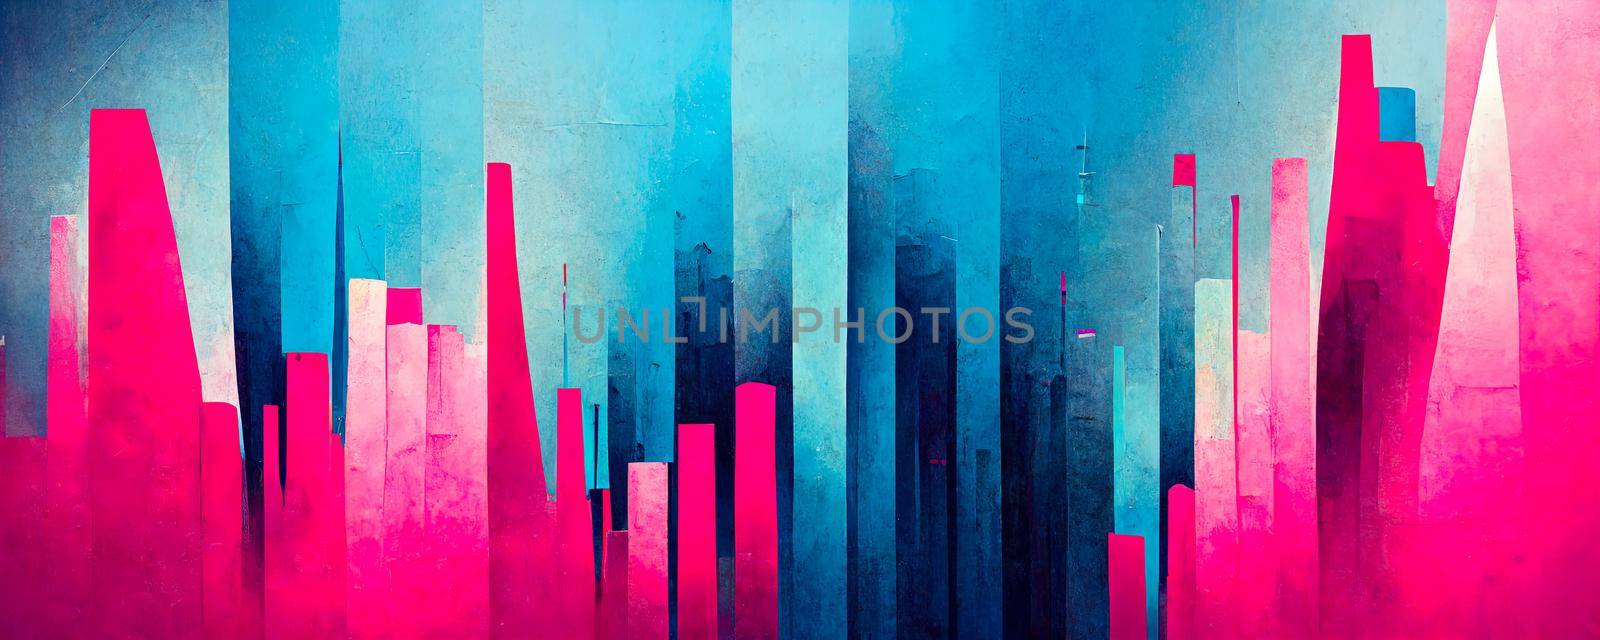 digital city, Colorful abstract wallpaper texture background illustration by TRMK